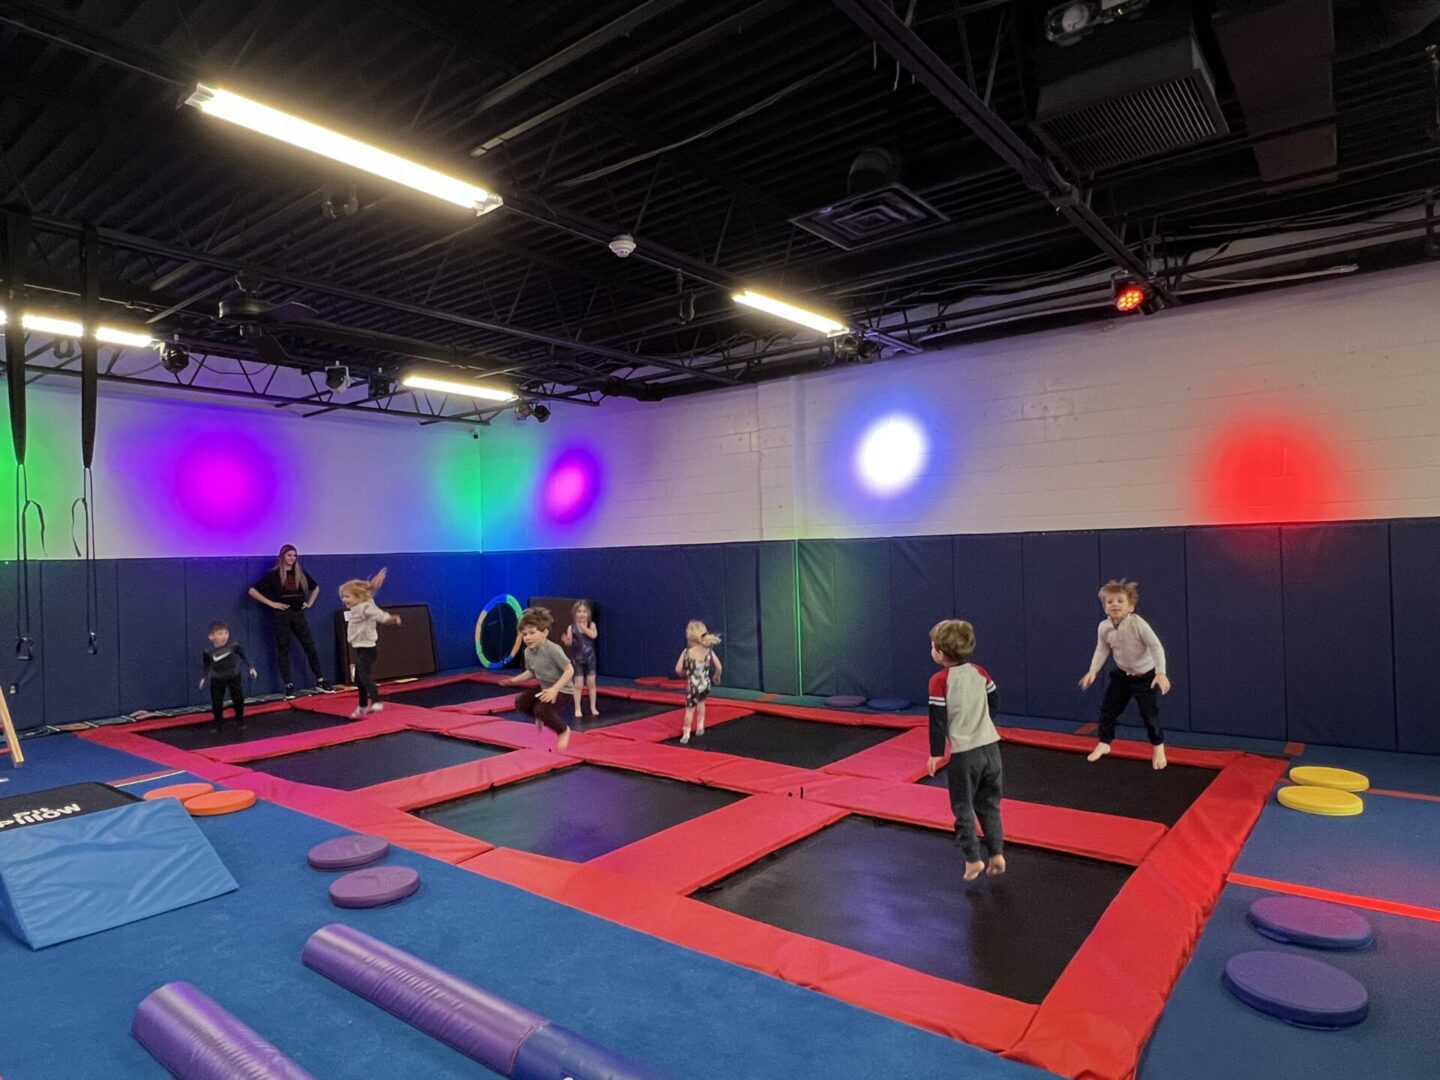 kids playing in the Elite Trampoline Academy room